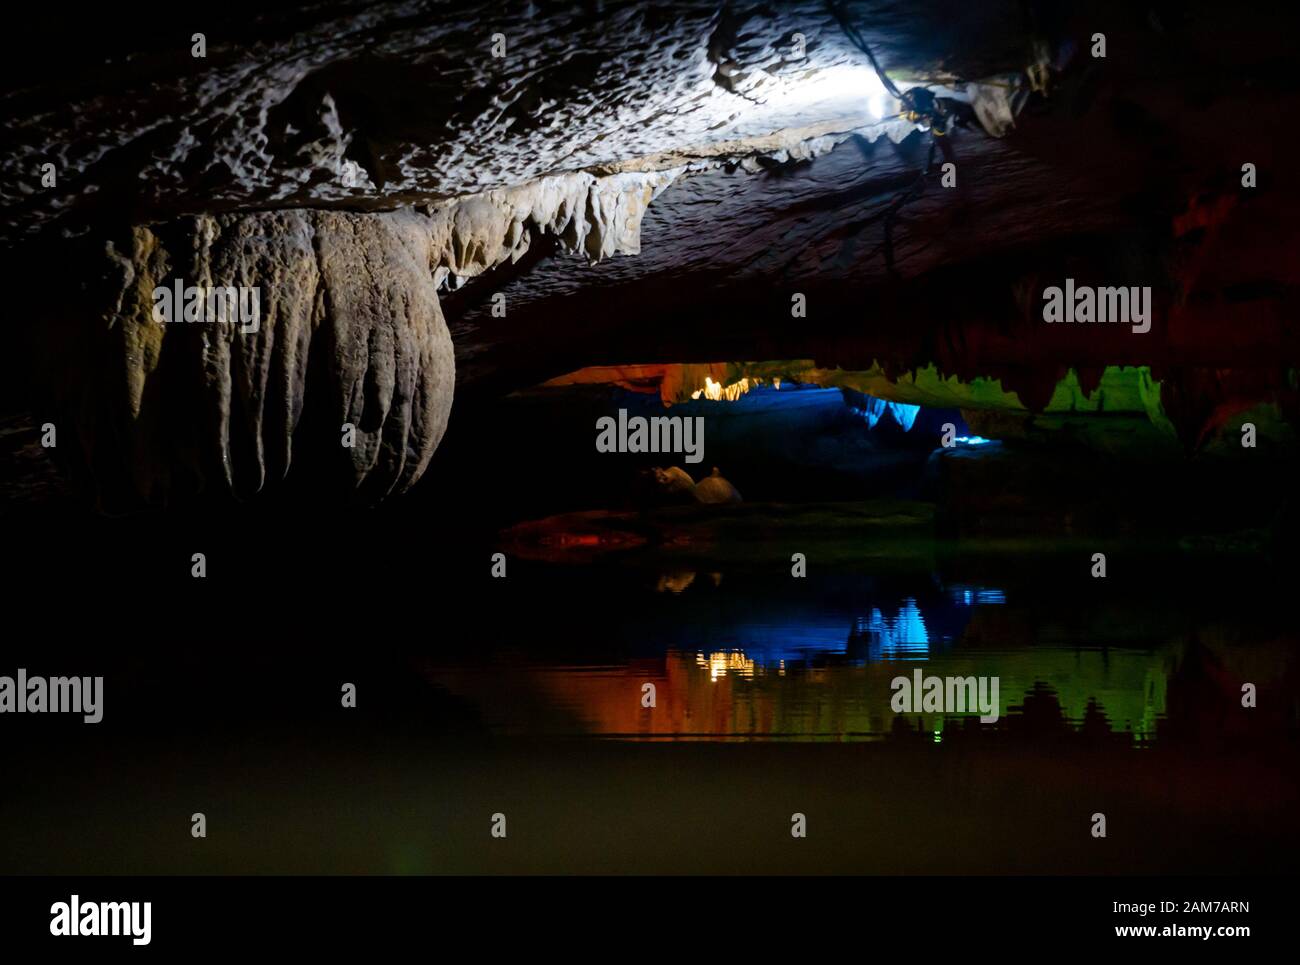 Thien Thanh cavern stalactites lit up with coloured lights reflected in water, Tam Coc cave system, Ninh Binh, Vietnam, Asia Stock Photo